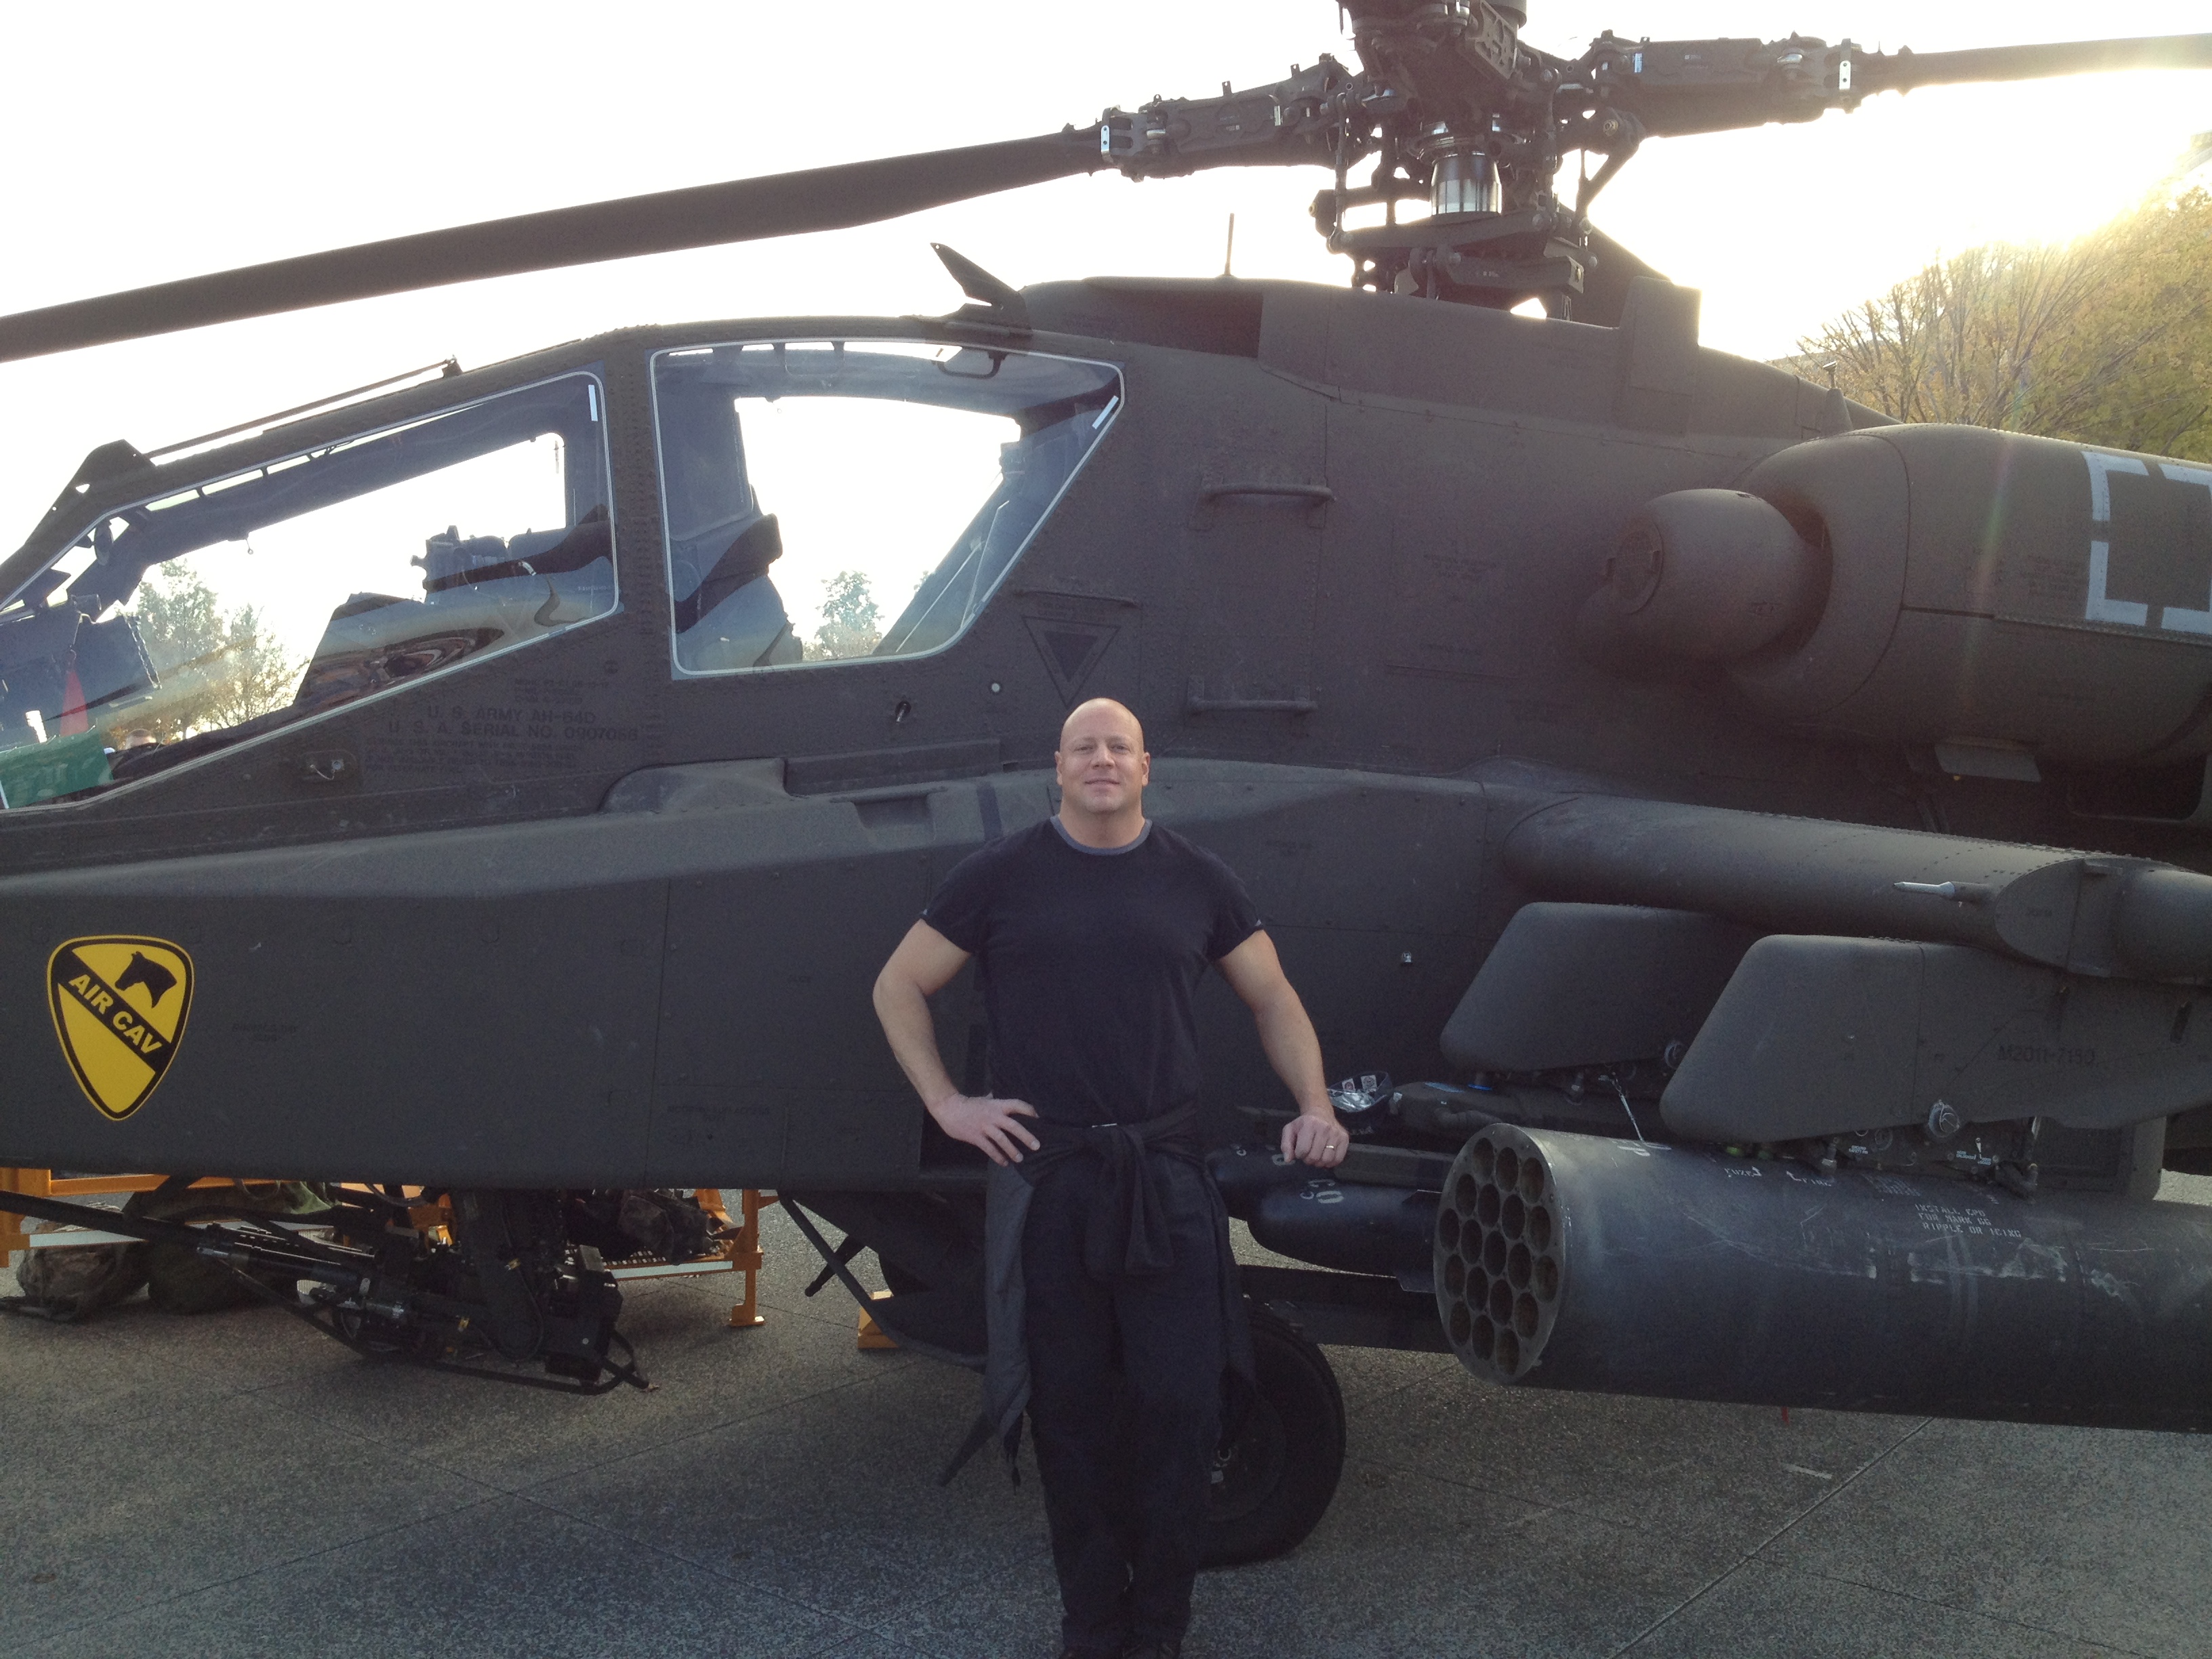 Robert Bates DDS with Attack Helicopter